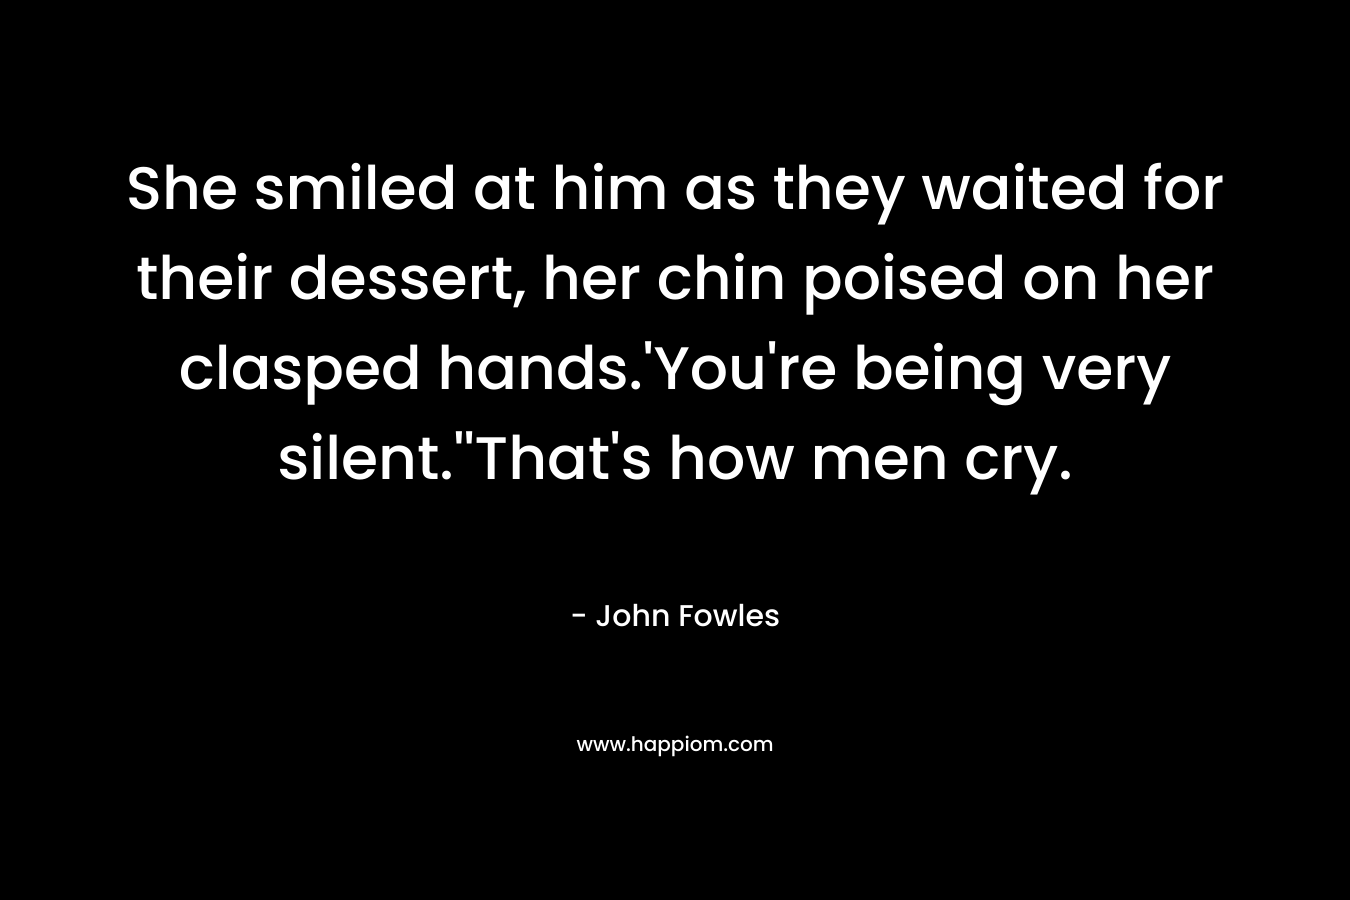 She smiled at him as they waited for their dessert, her chin poised on her clasped hands.’You’re being very silent.”That’s how men cry. – John Fowles